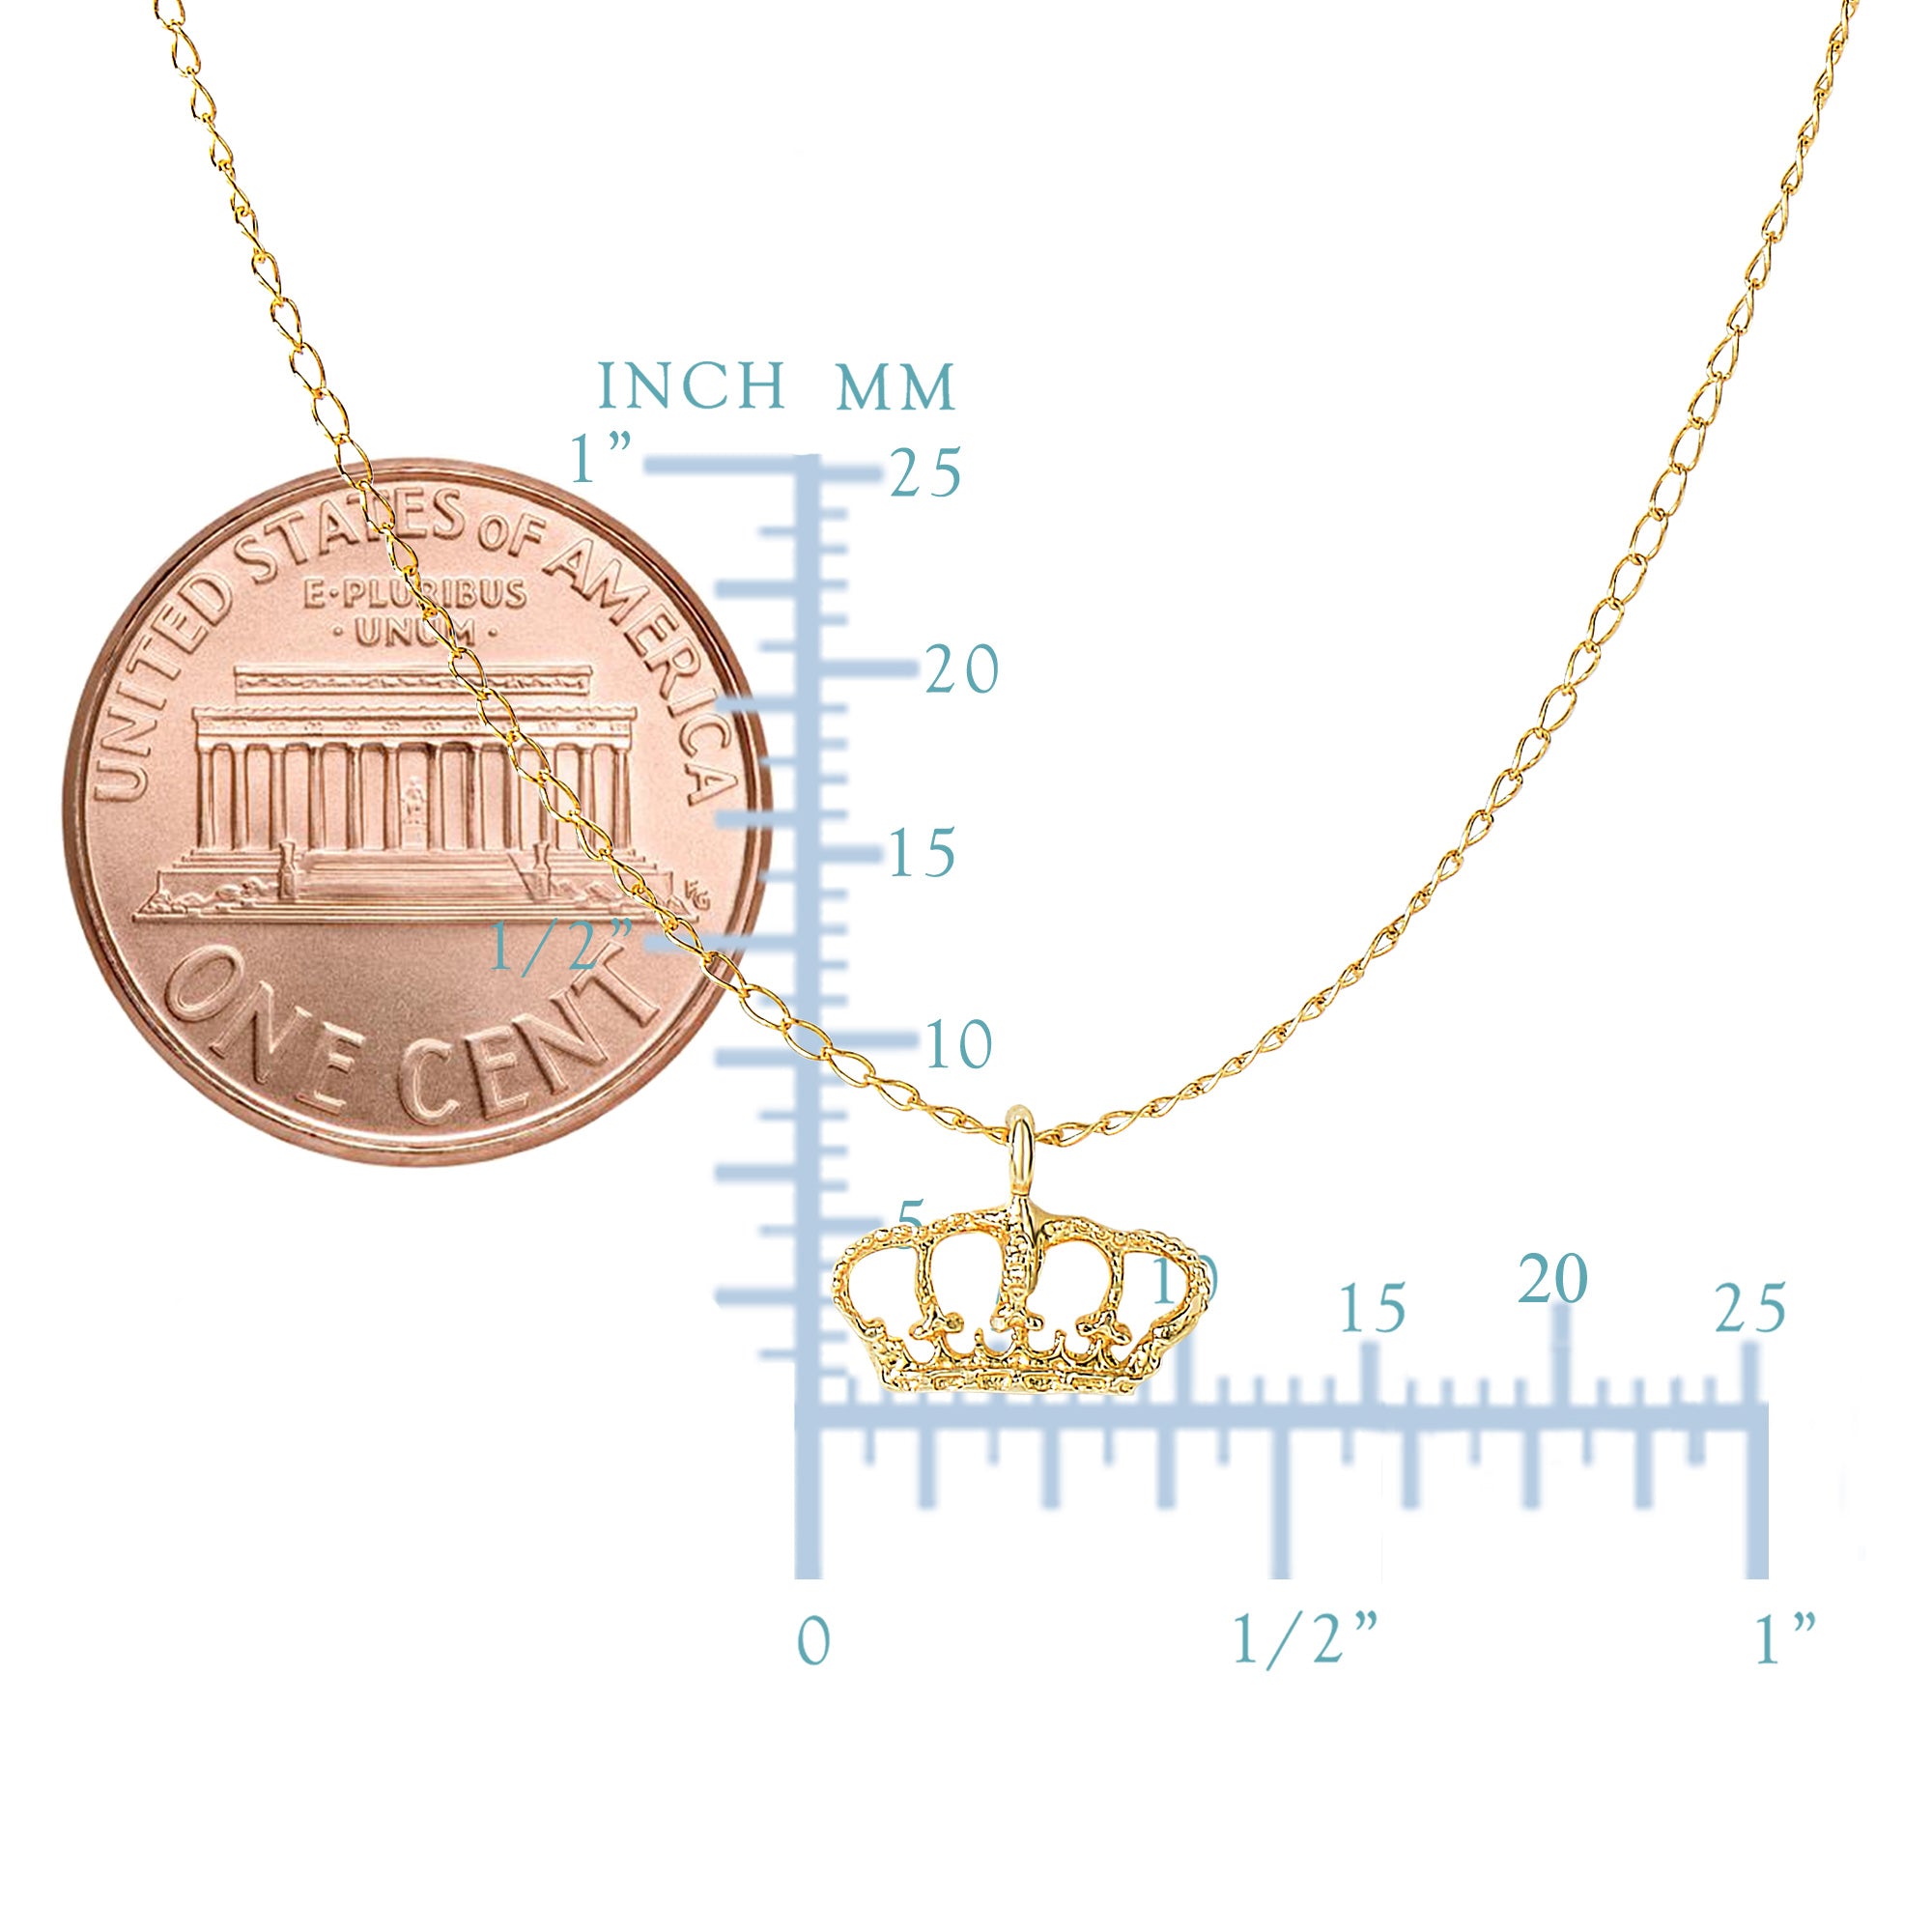 14k Yellow Gold Shiny Crown Pendant Necklace, 18" fine designer jewelry for men and women